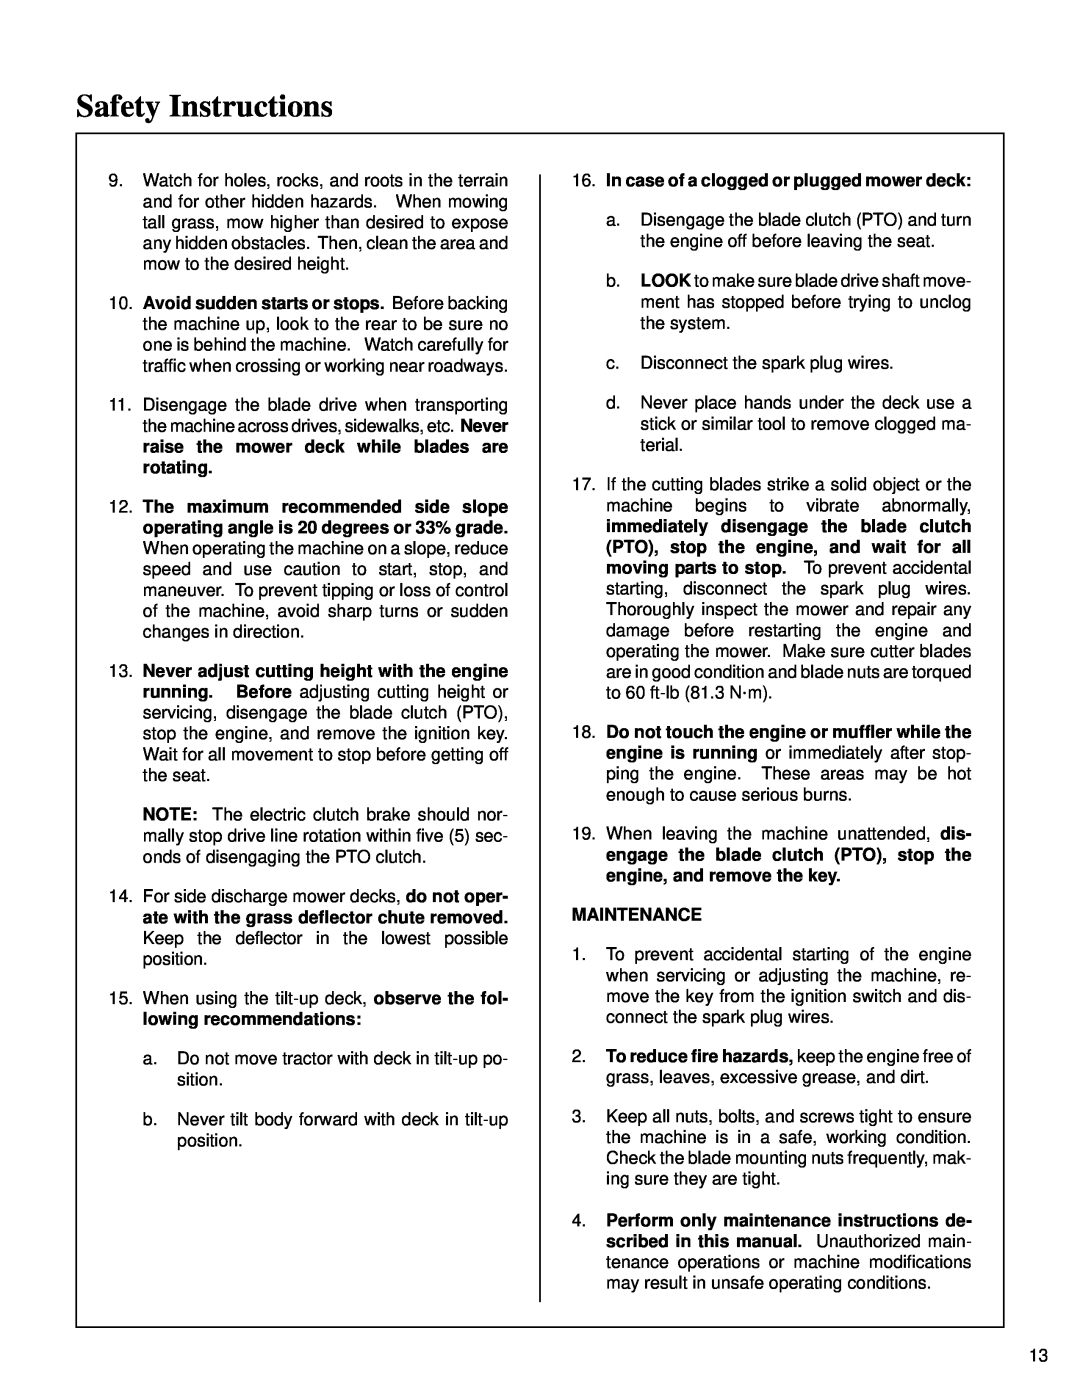 Briggs & Stratton MB (18 HP) owner manual Safety Instructions, In case of a clogged or plugged mower deck, Maintenance 